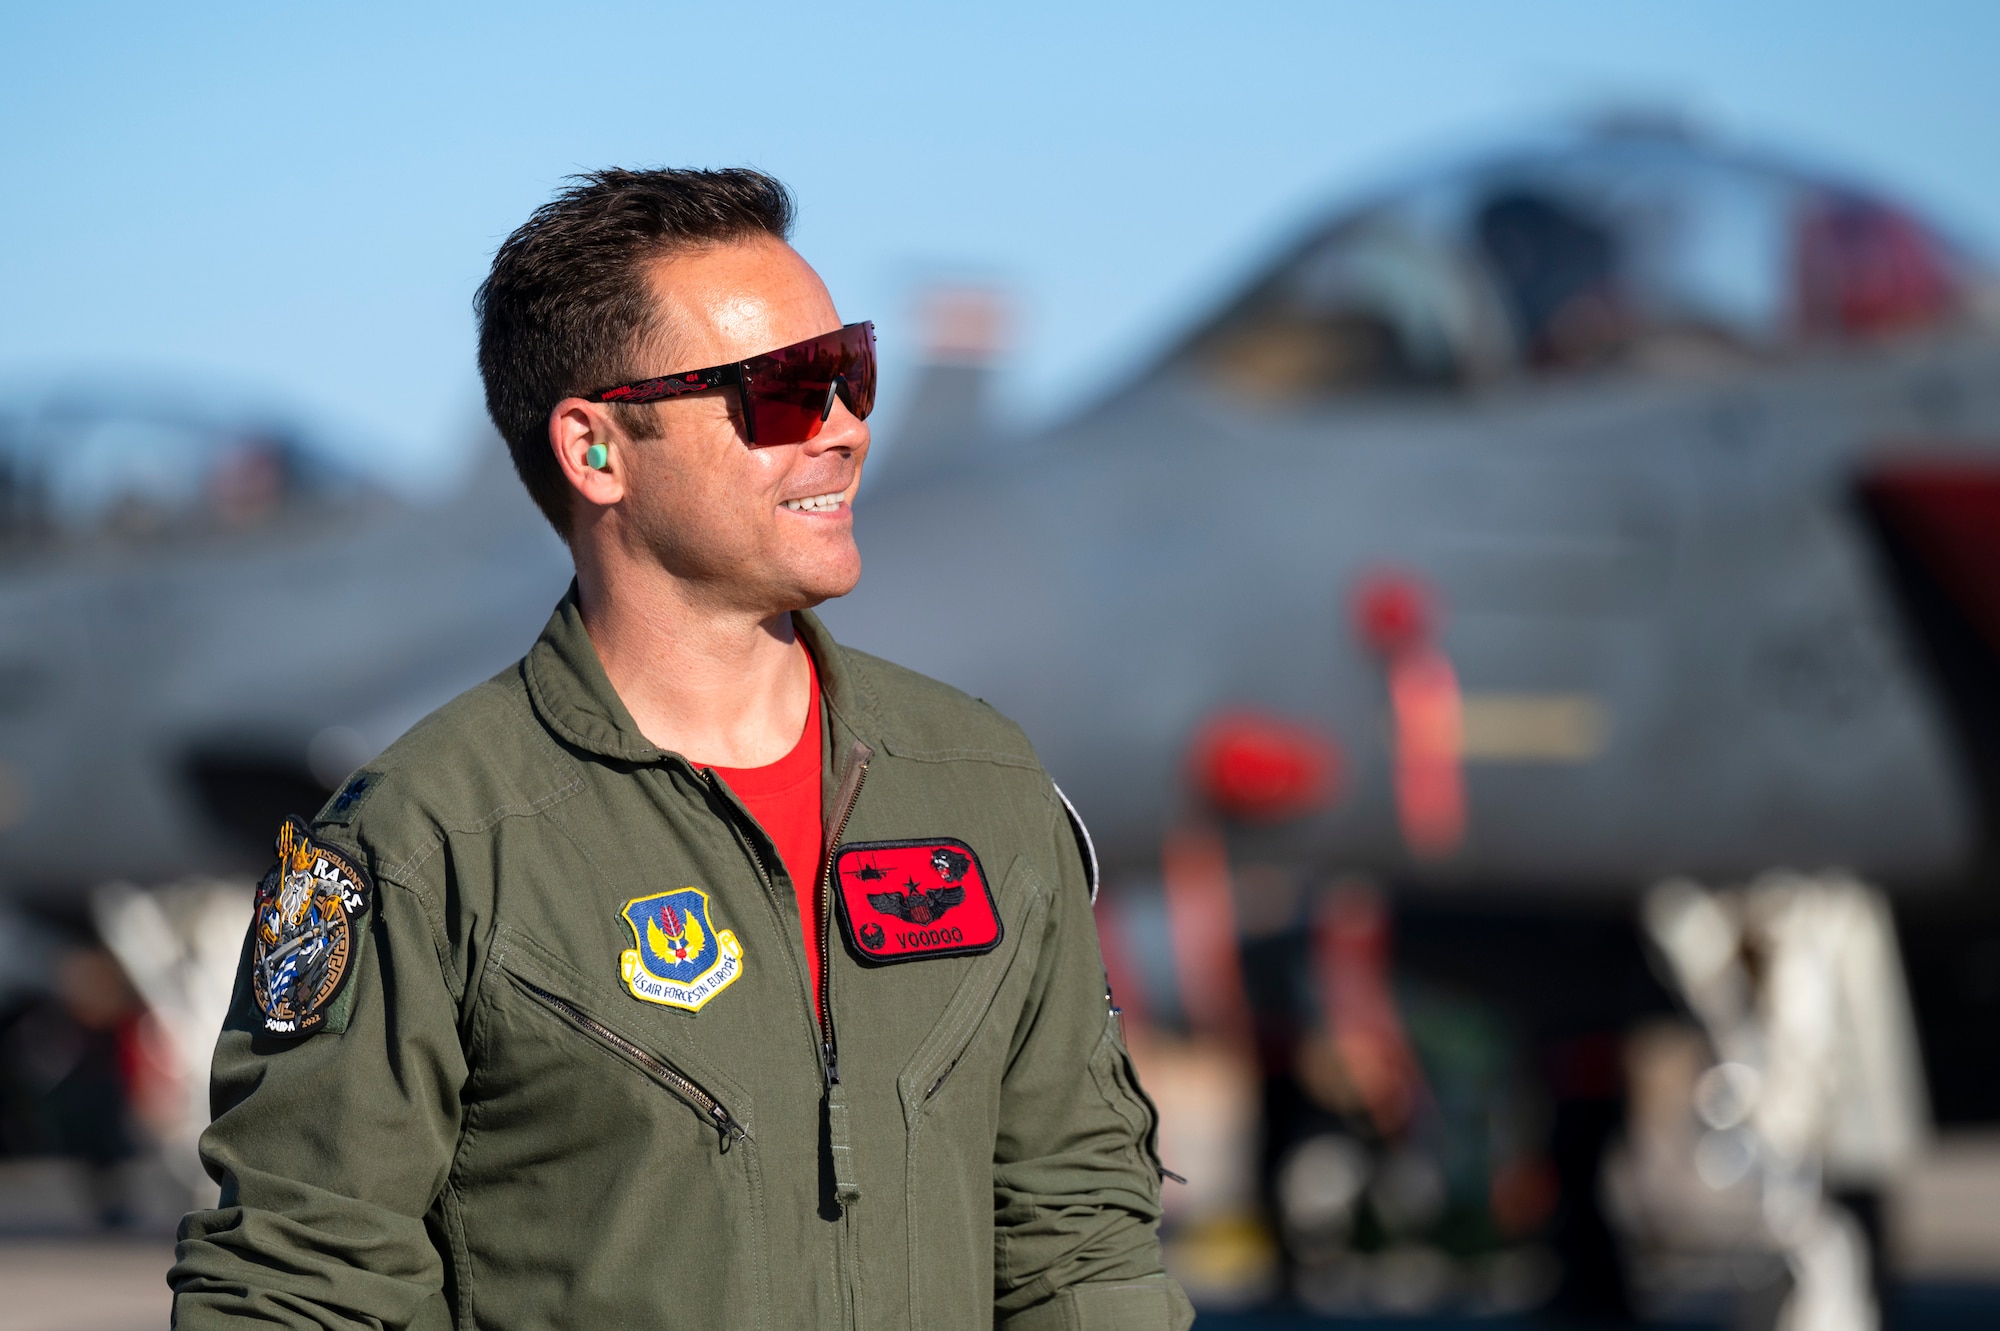 U.S. Air Force Lt. Col. Curtis Culver, 494th Fighter Squadron commander, smiles as he watches two F-15E Strike Eagles return after completing an Agile Combat Employment movement between combatant commands, at Souda Air Base, Greece, July 15, 2022. The 494 FS flew two Strike Eagles from Souda AB to an undisclosed location within the U.S. Central Command area of responsibility, where the aircraft landed, refueled and returned the same day. (U.S. Air Force photo by Tech. Sgt. Rachel Maxwell)